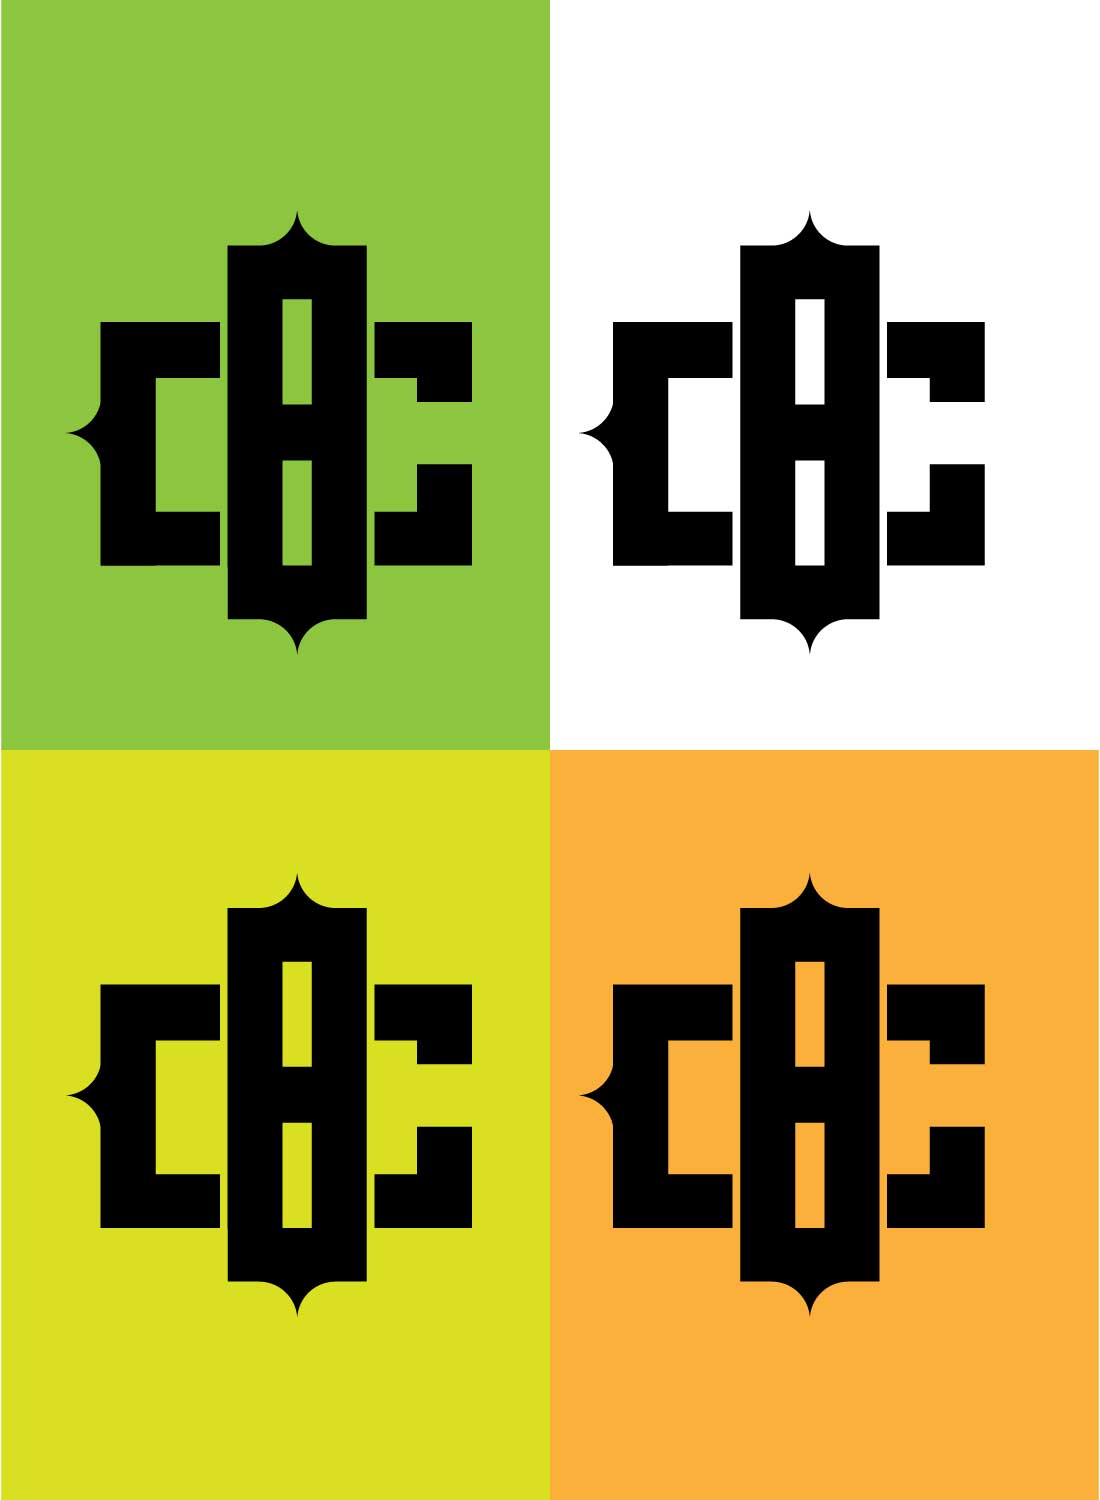 Set of four different logos with different colors.